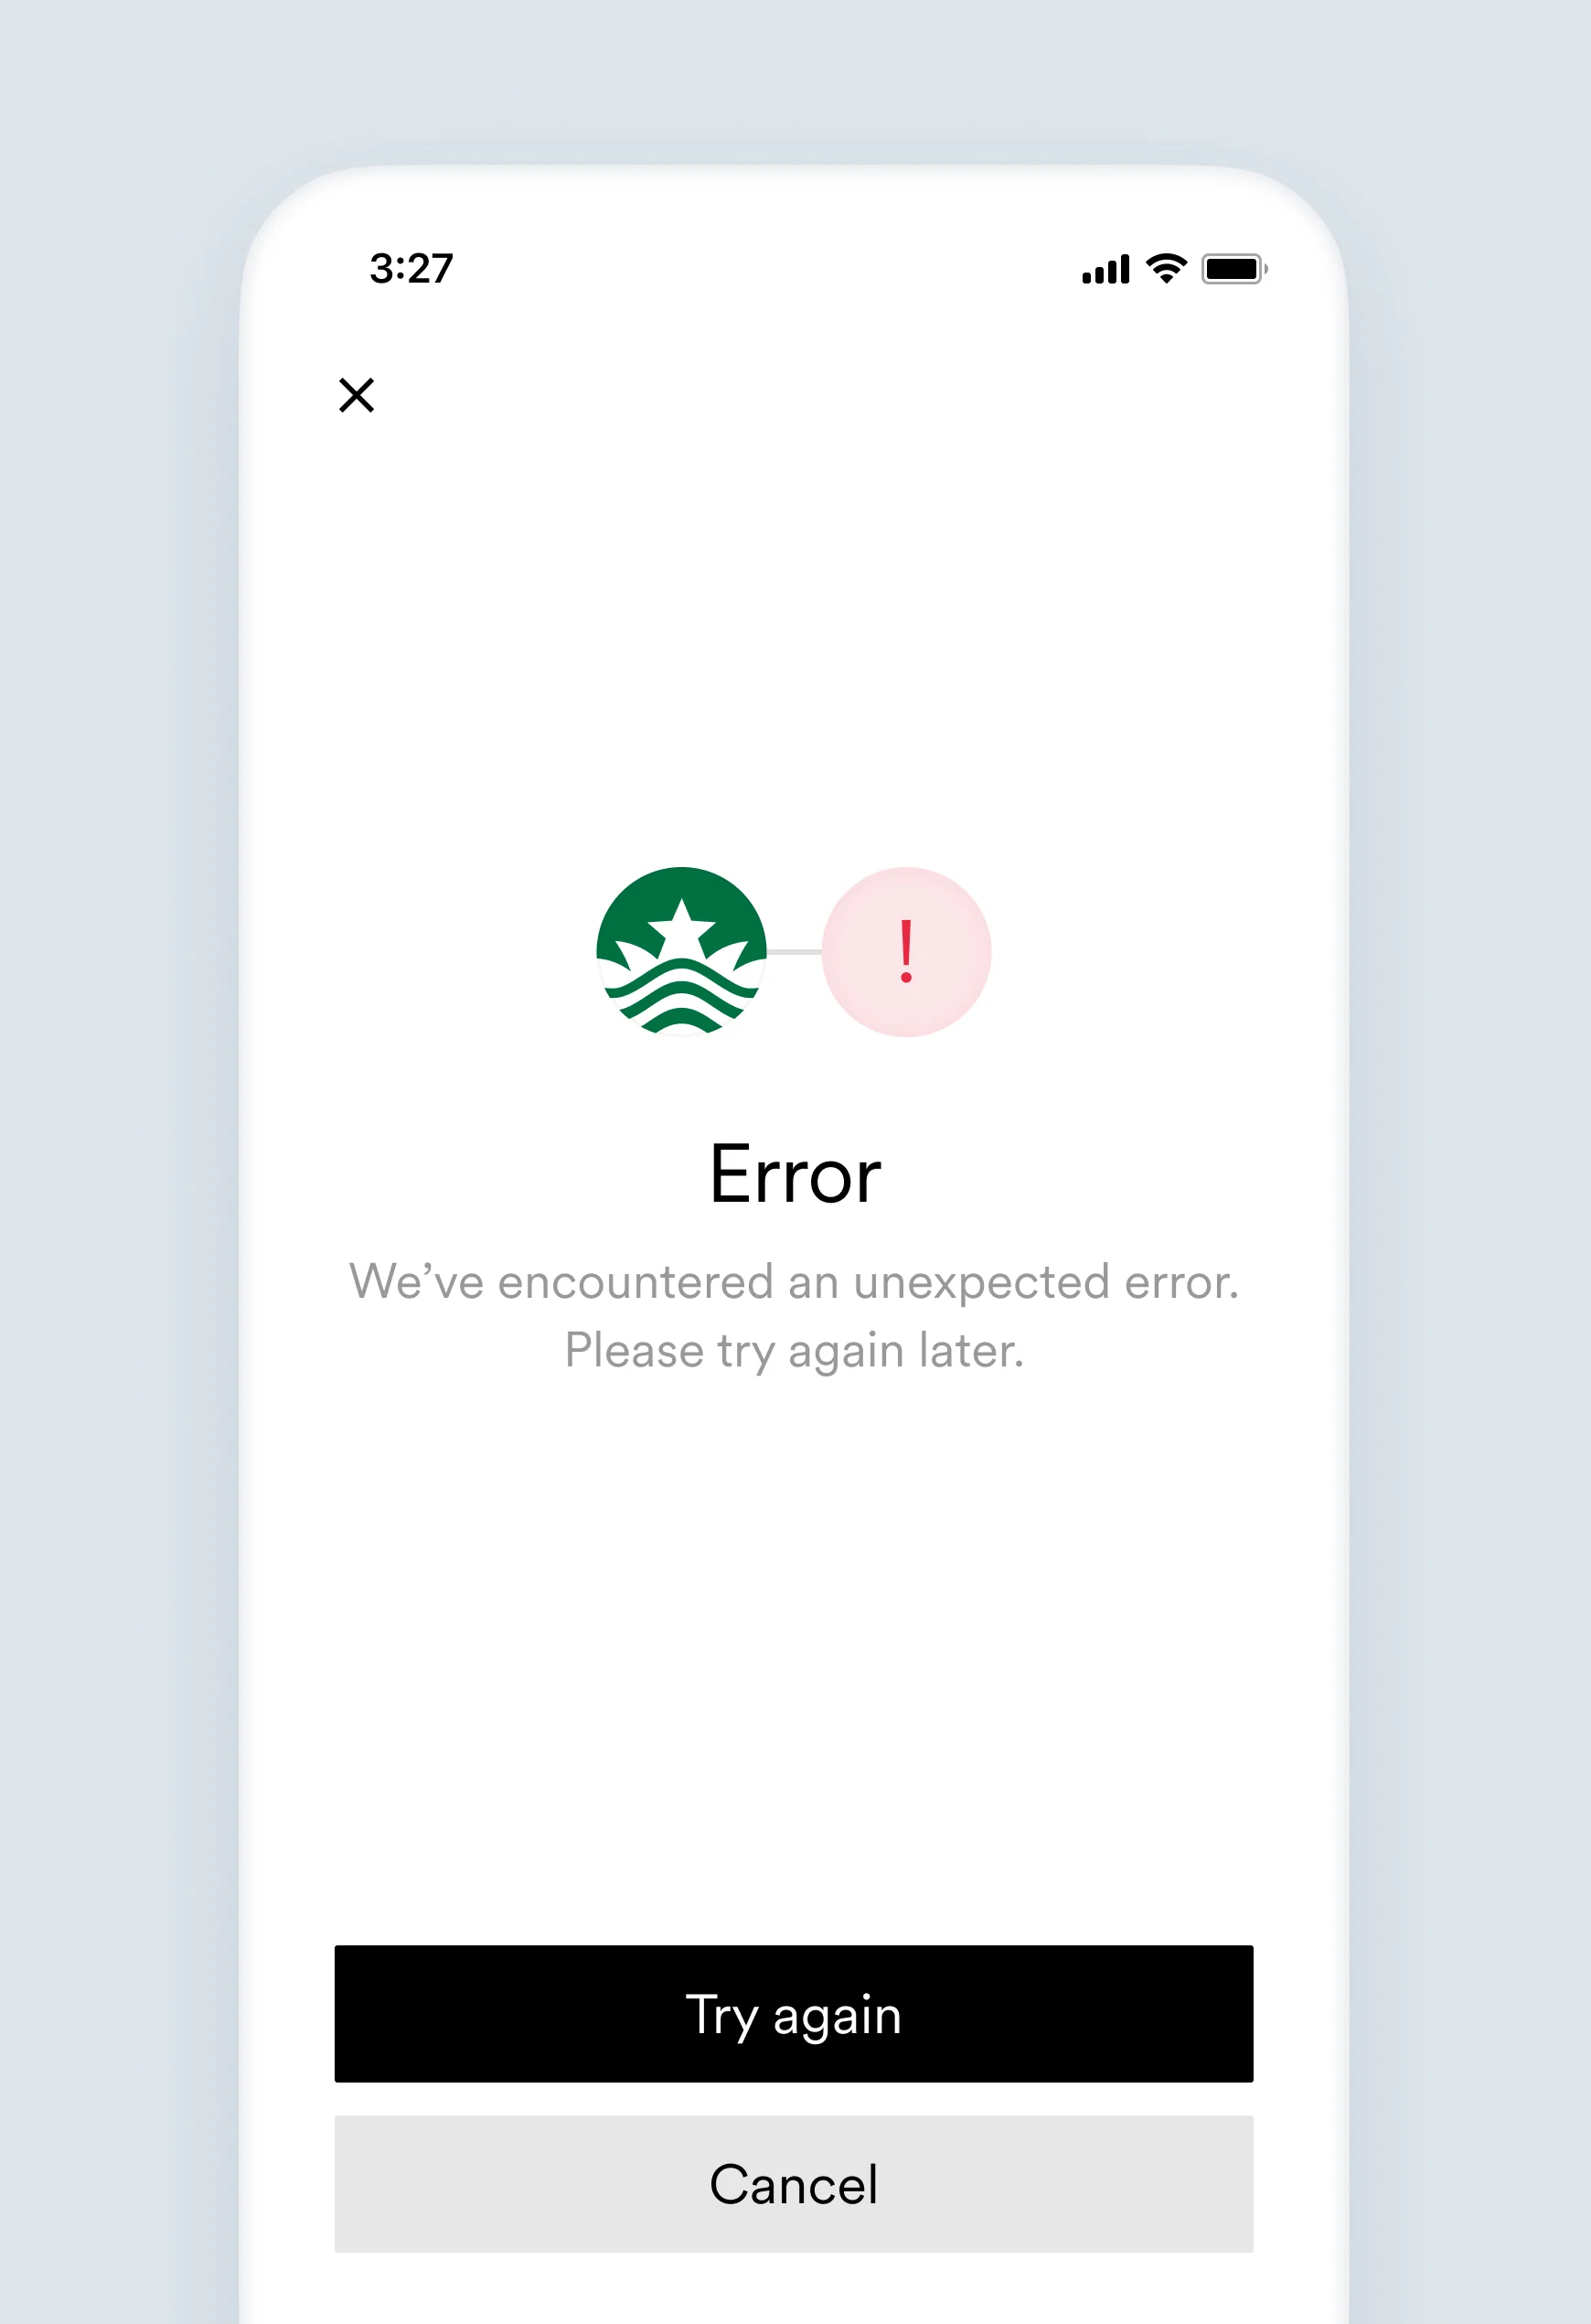 The system_error account connection error screen.